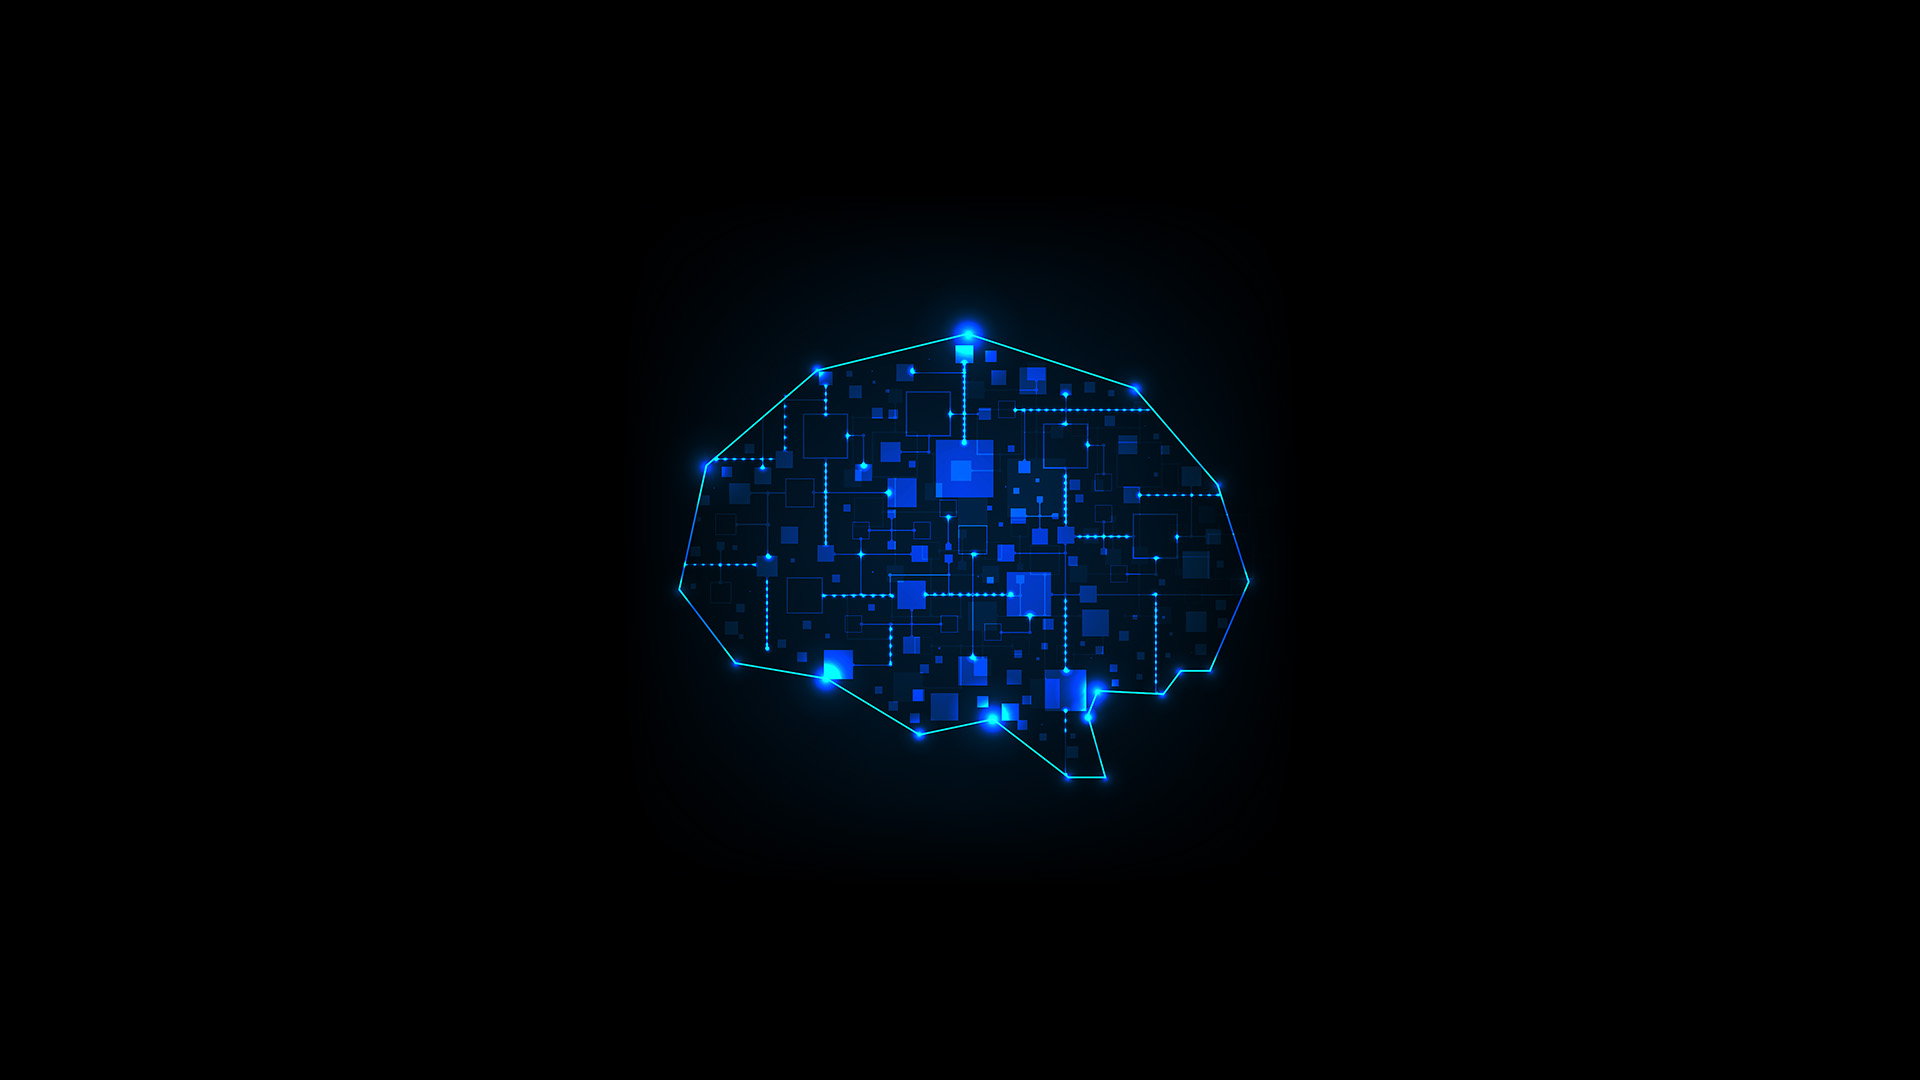 General 1920x1080 black background minimalism digital art brain lines blue glowing circuit boards square connectivity electricity technology